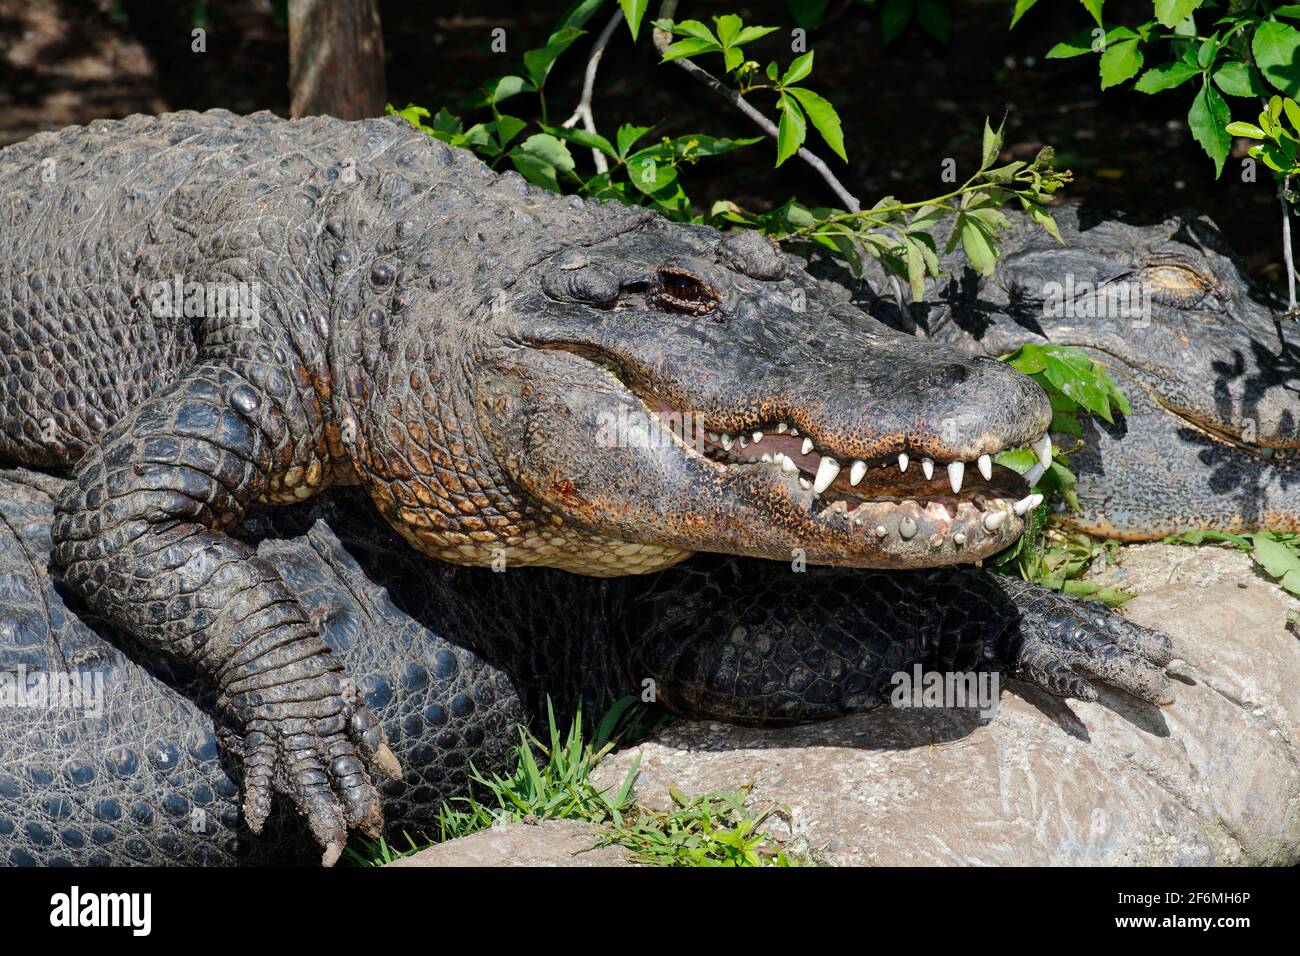 An American alligator, Alligator mississippiensis, is basking in the sun. Stock Photo